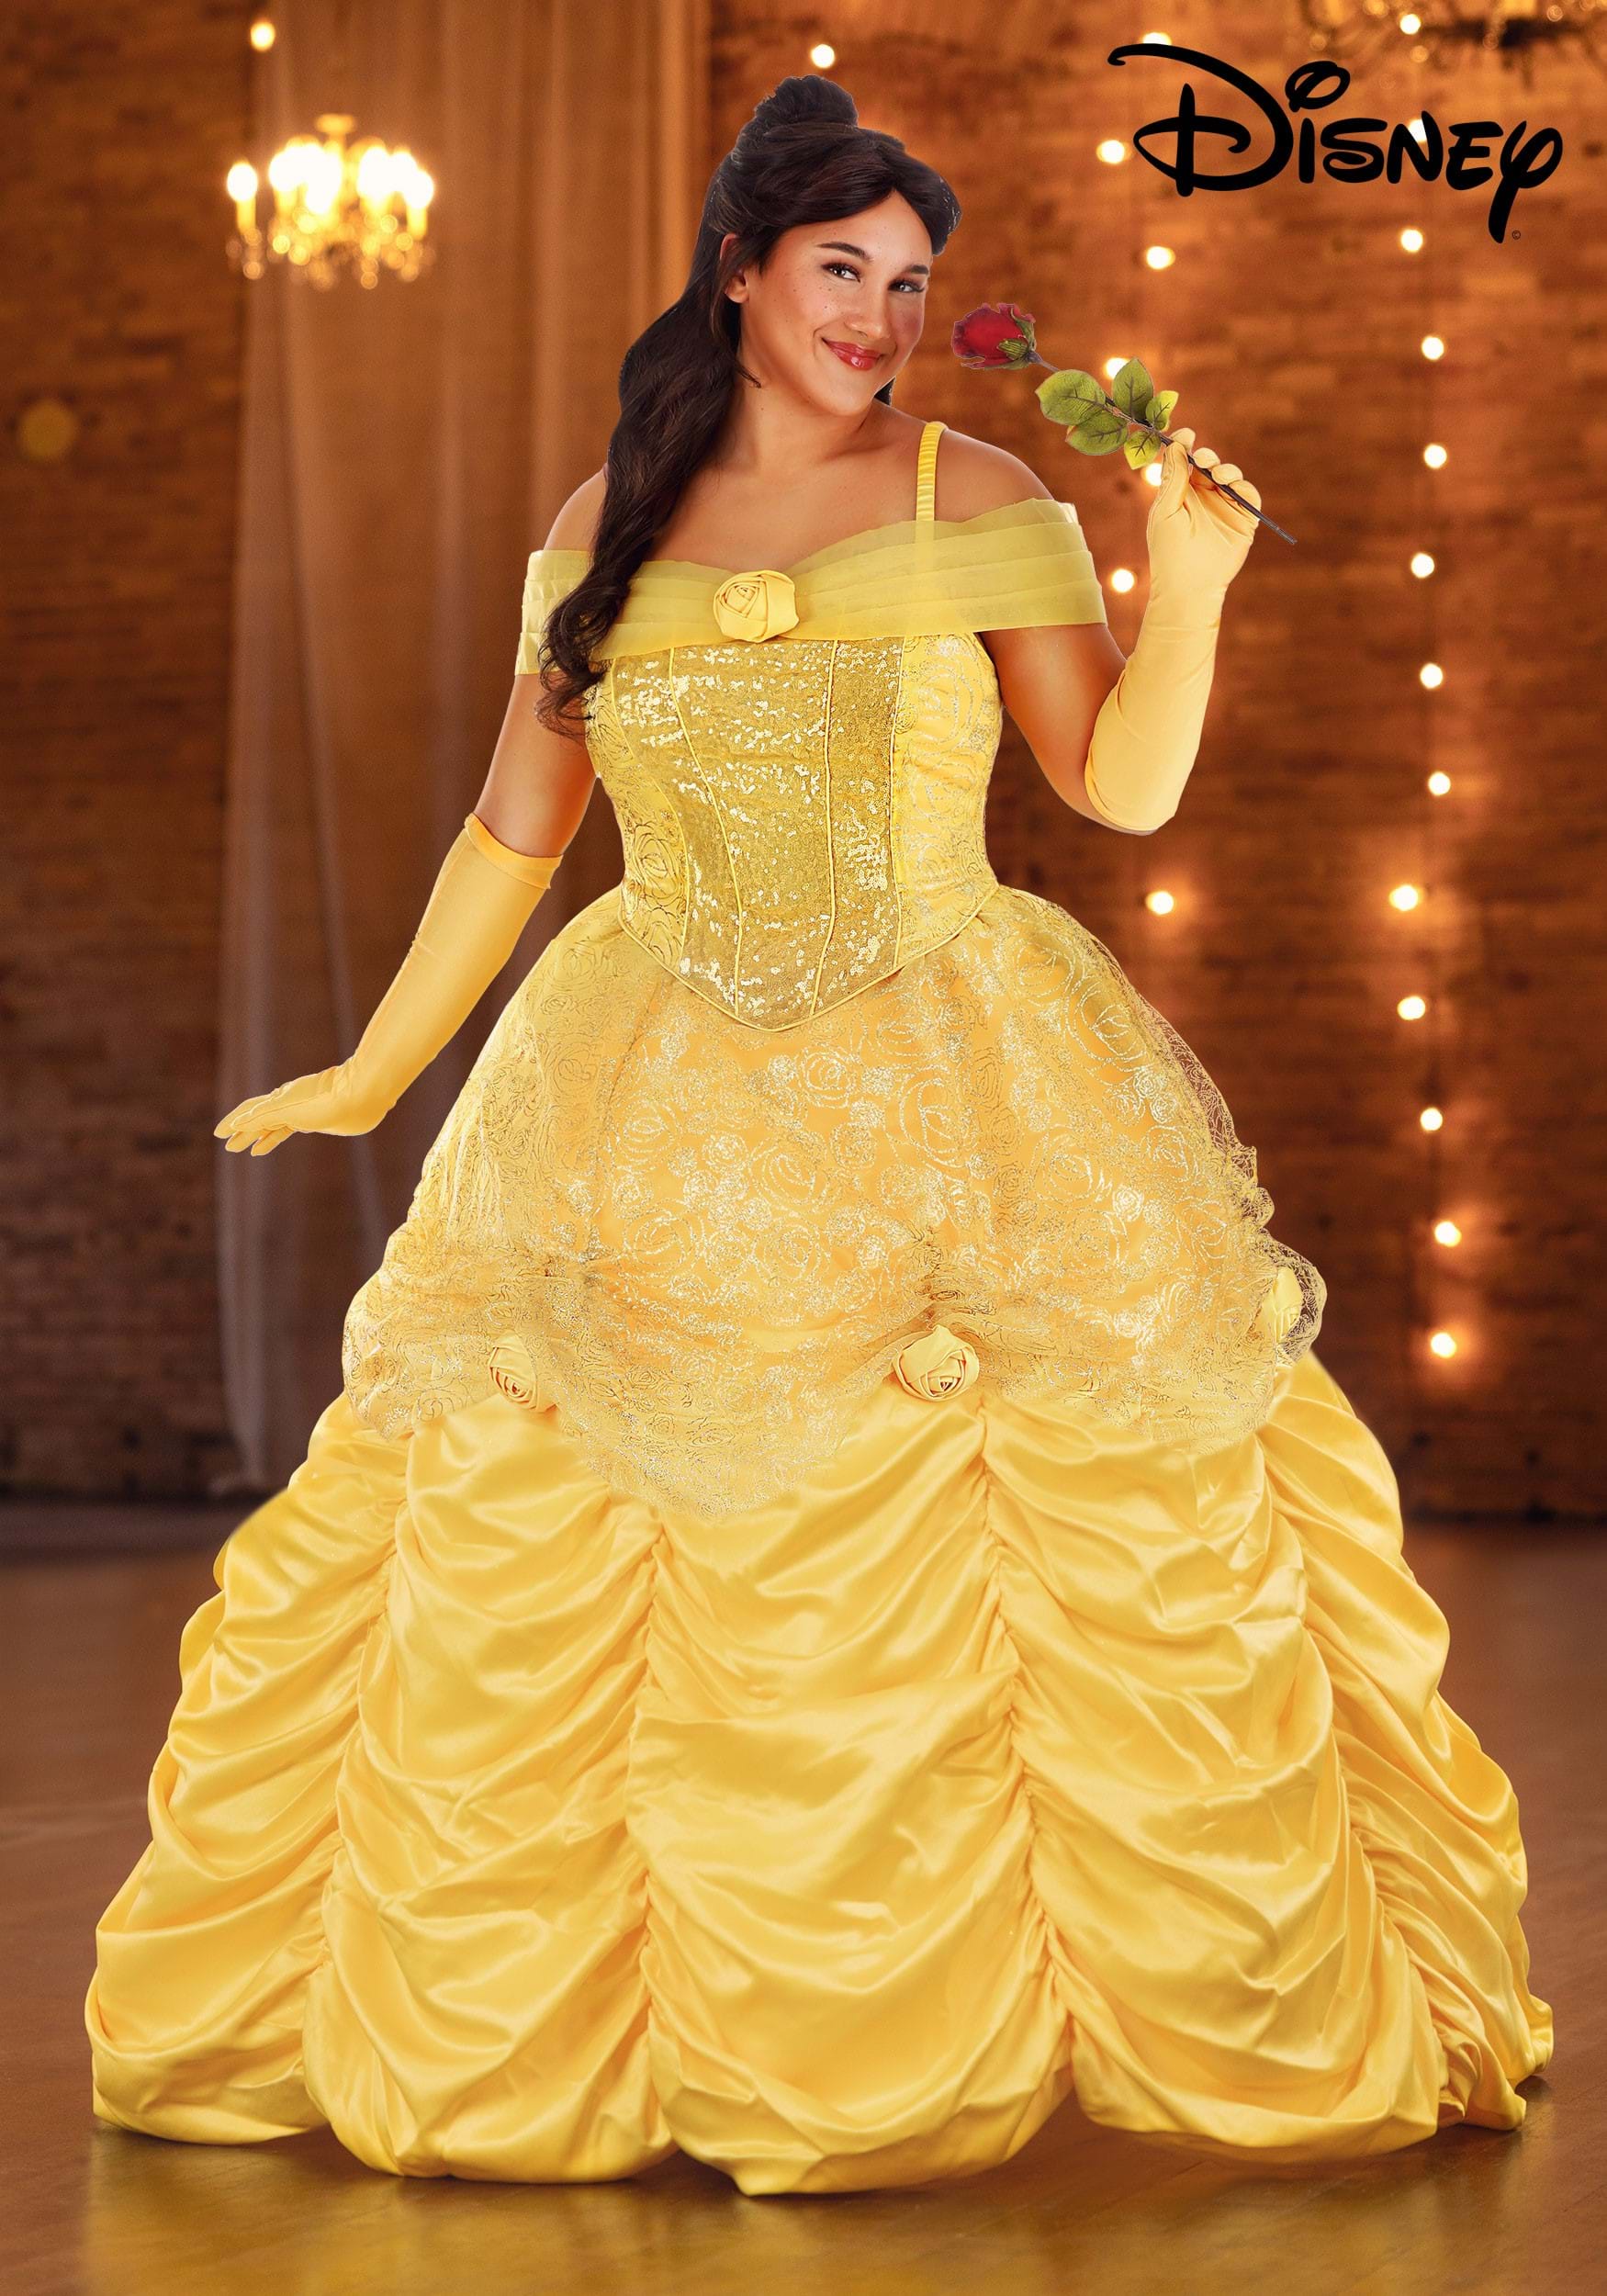 Adult Deluxe Princess Belle Dress Belle Cosplay Costume Ball Gown FREE P&P  | eBay